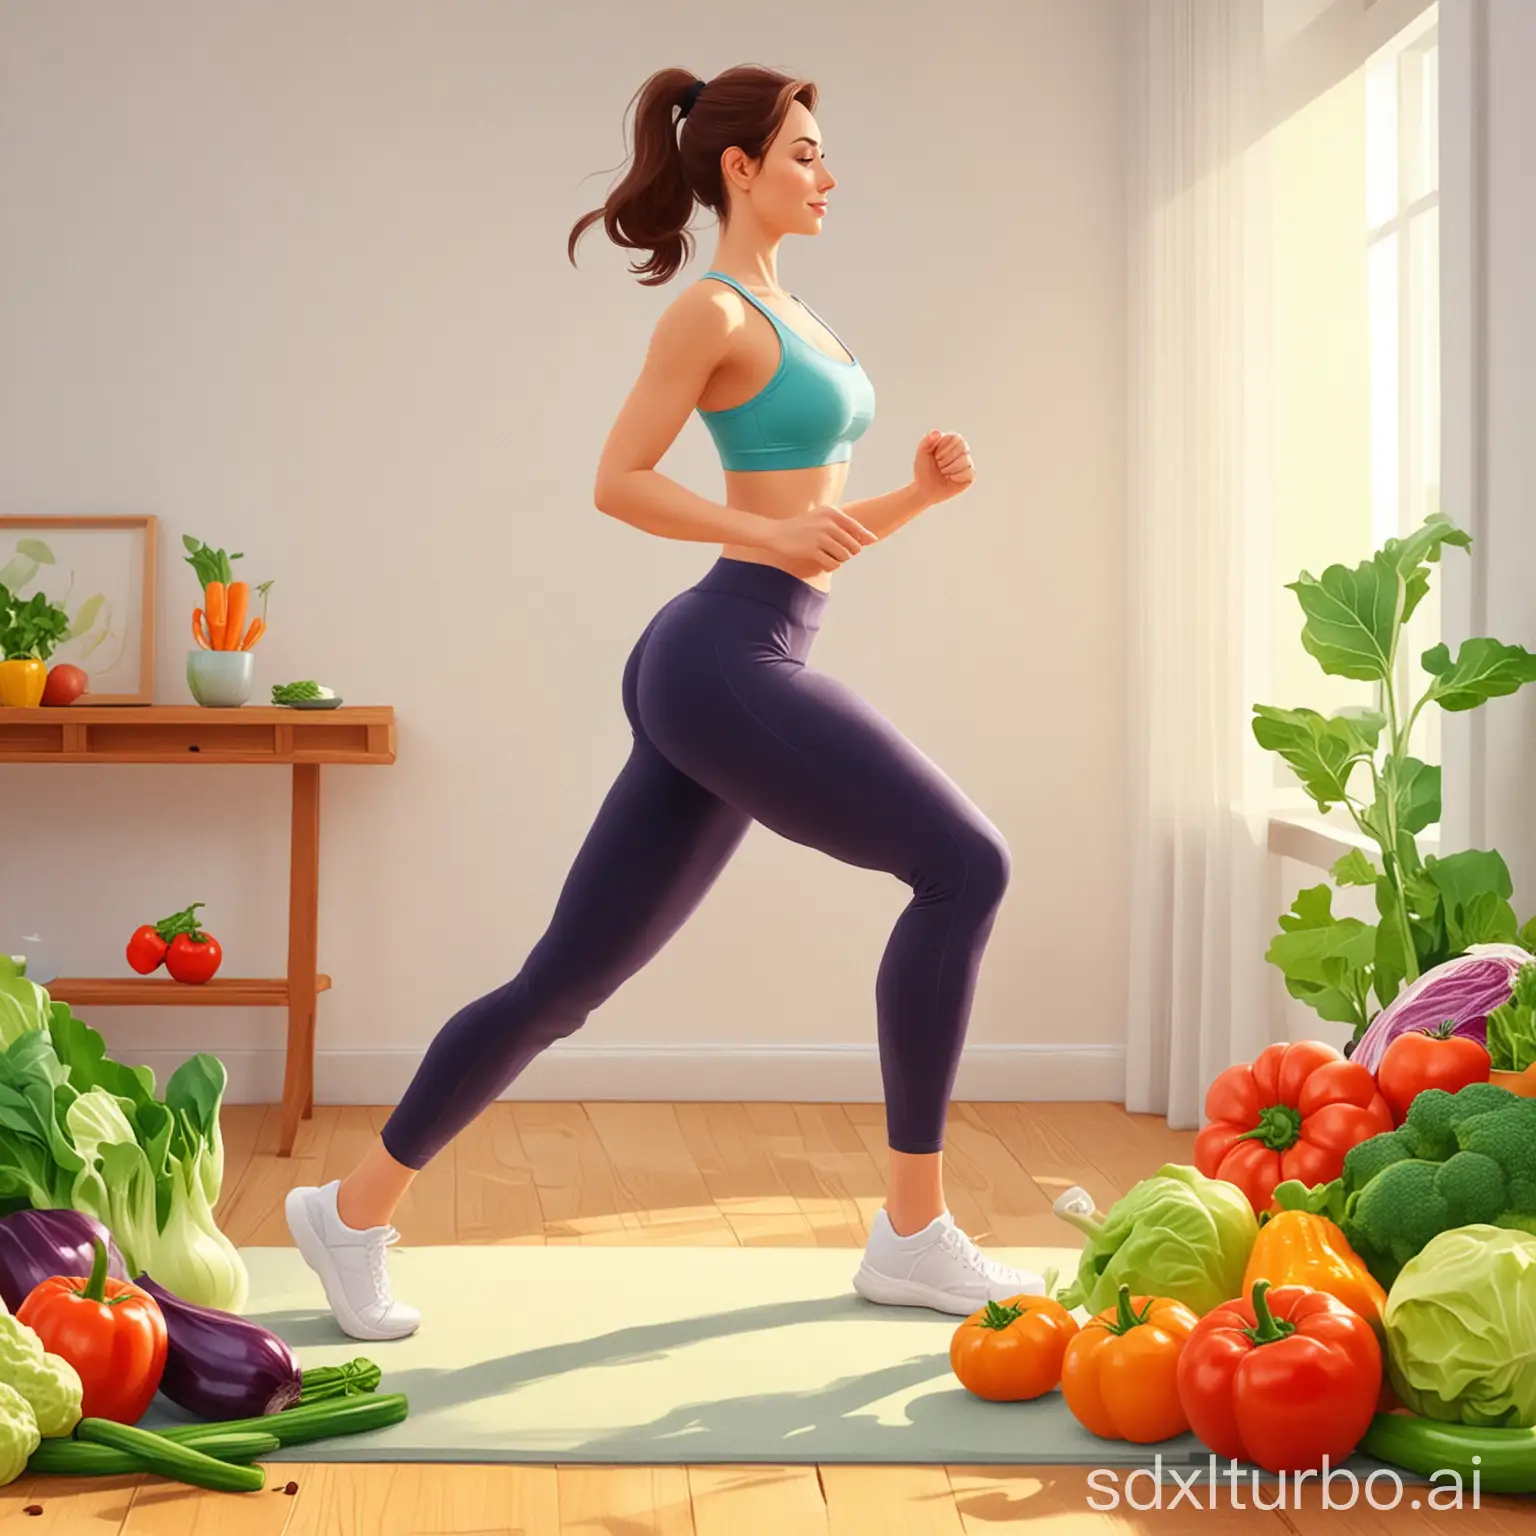 Fitness-Woman-Exercising-with-Vibrant-Vegetable-Background